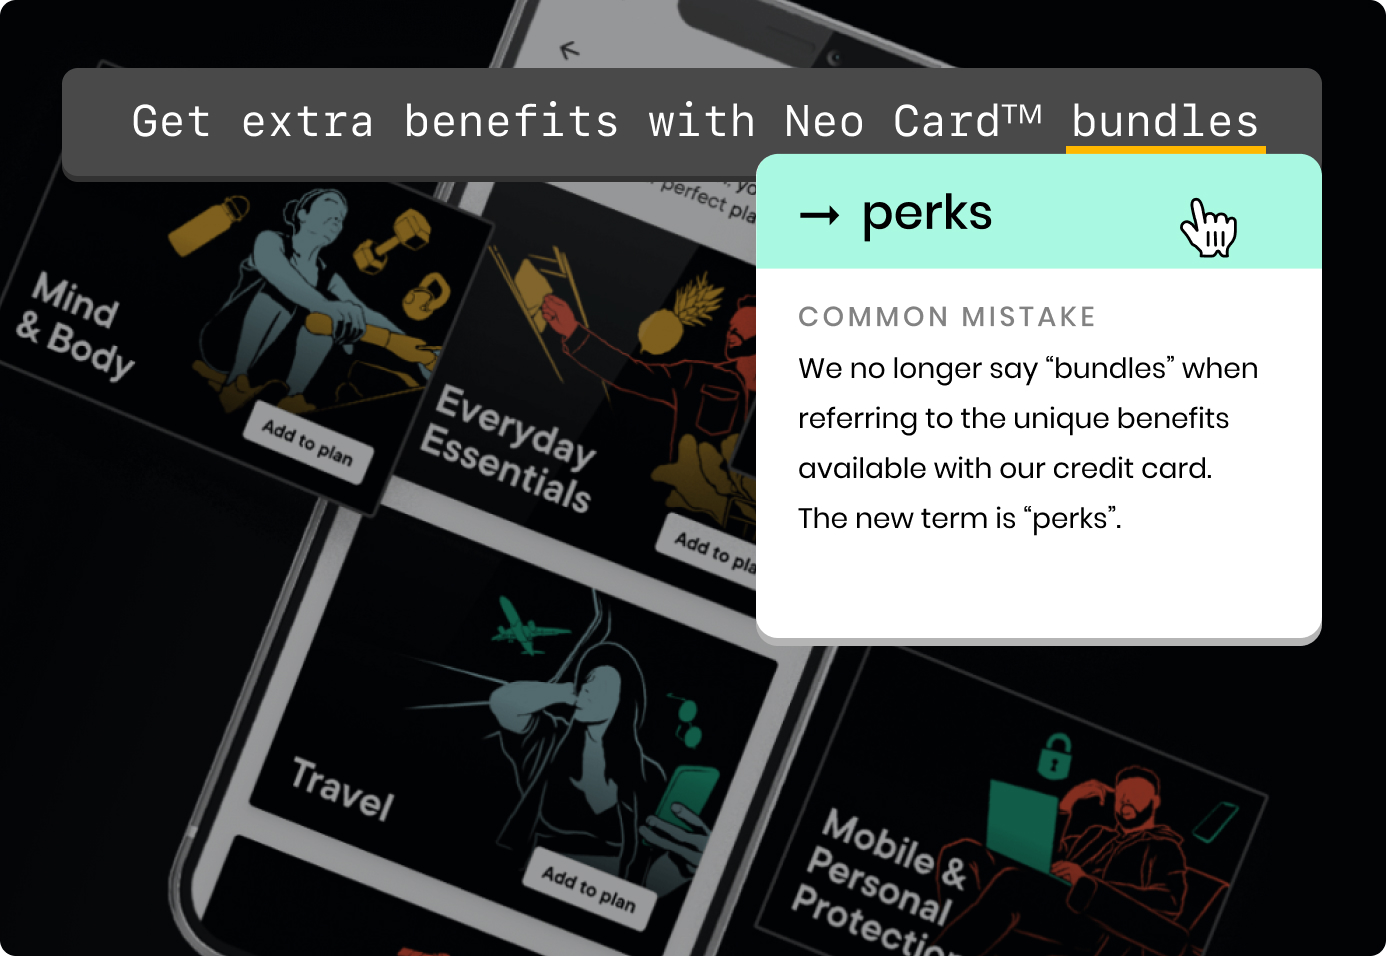 Writer highlighting that "perks" should now be used instead of "bundles"